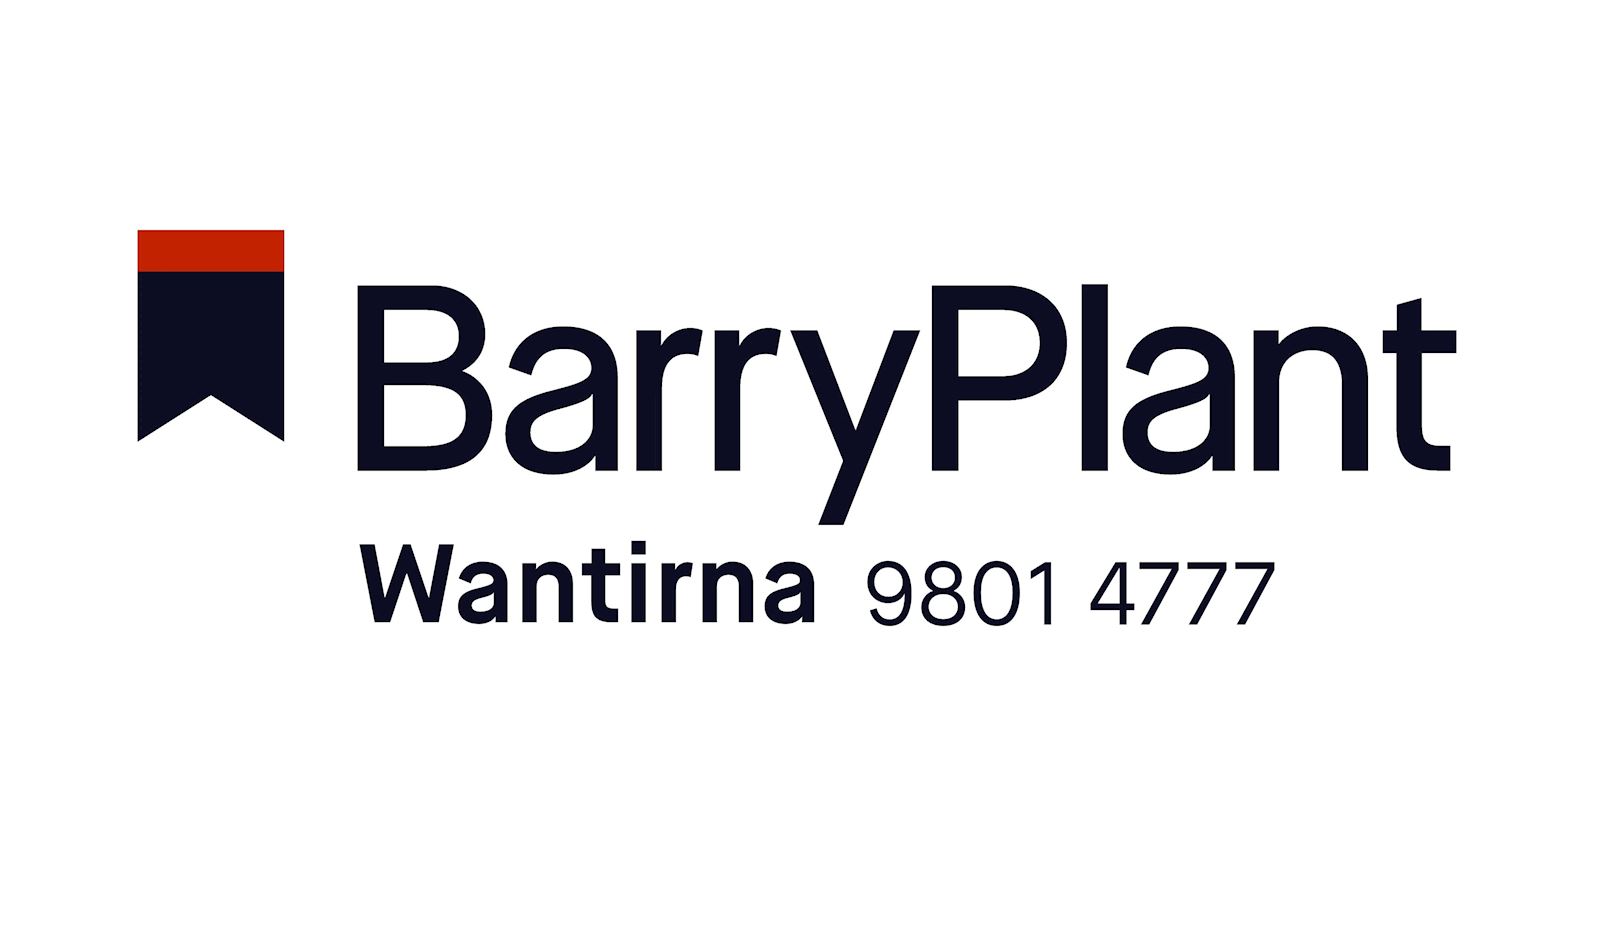 Barry Plant - Wantirna